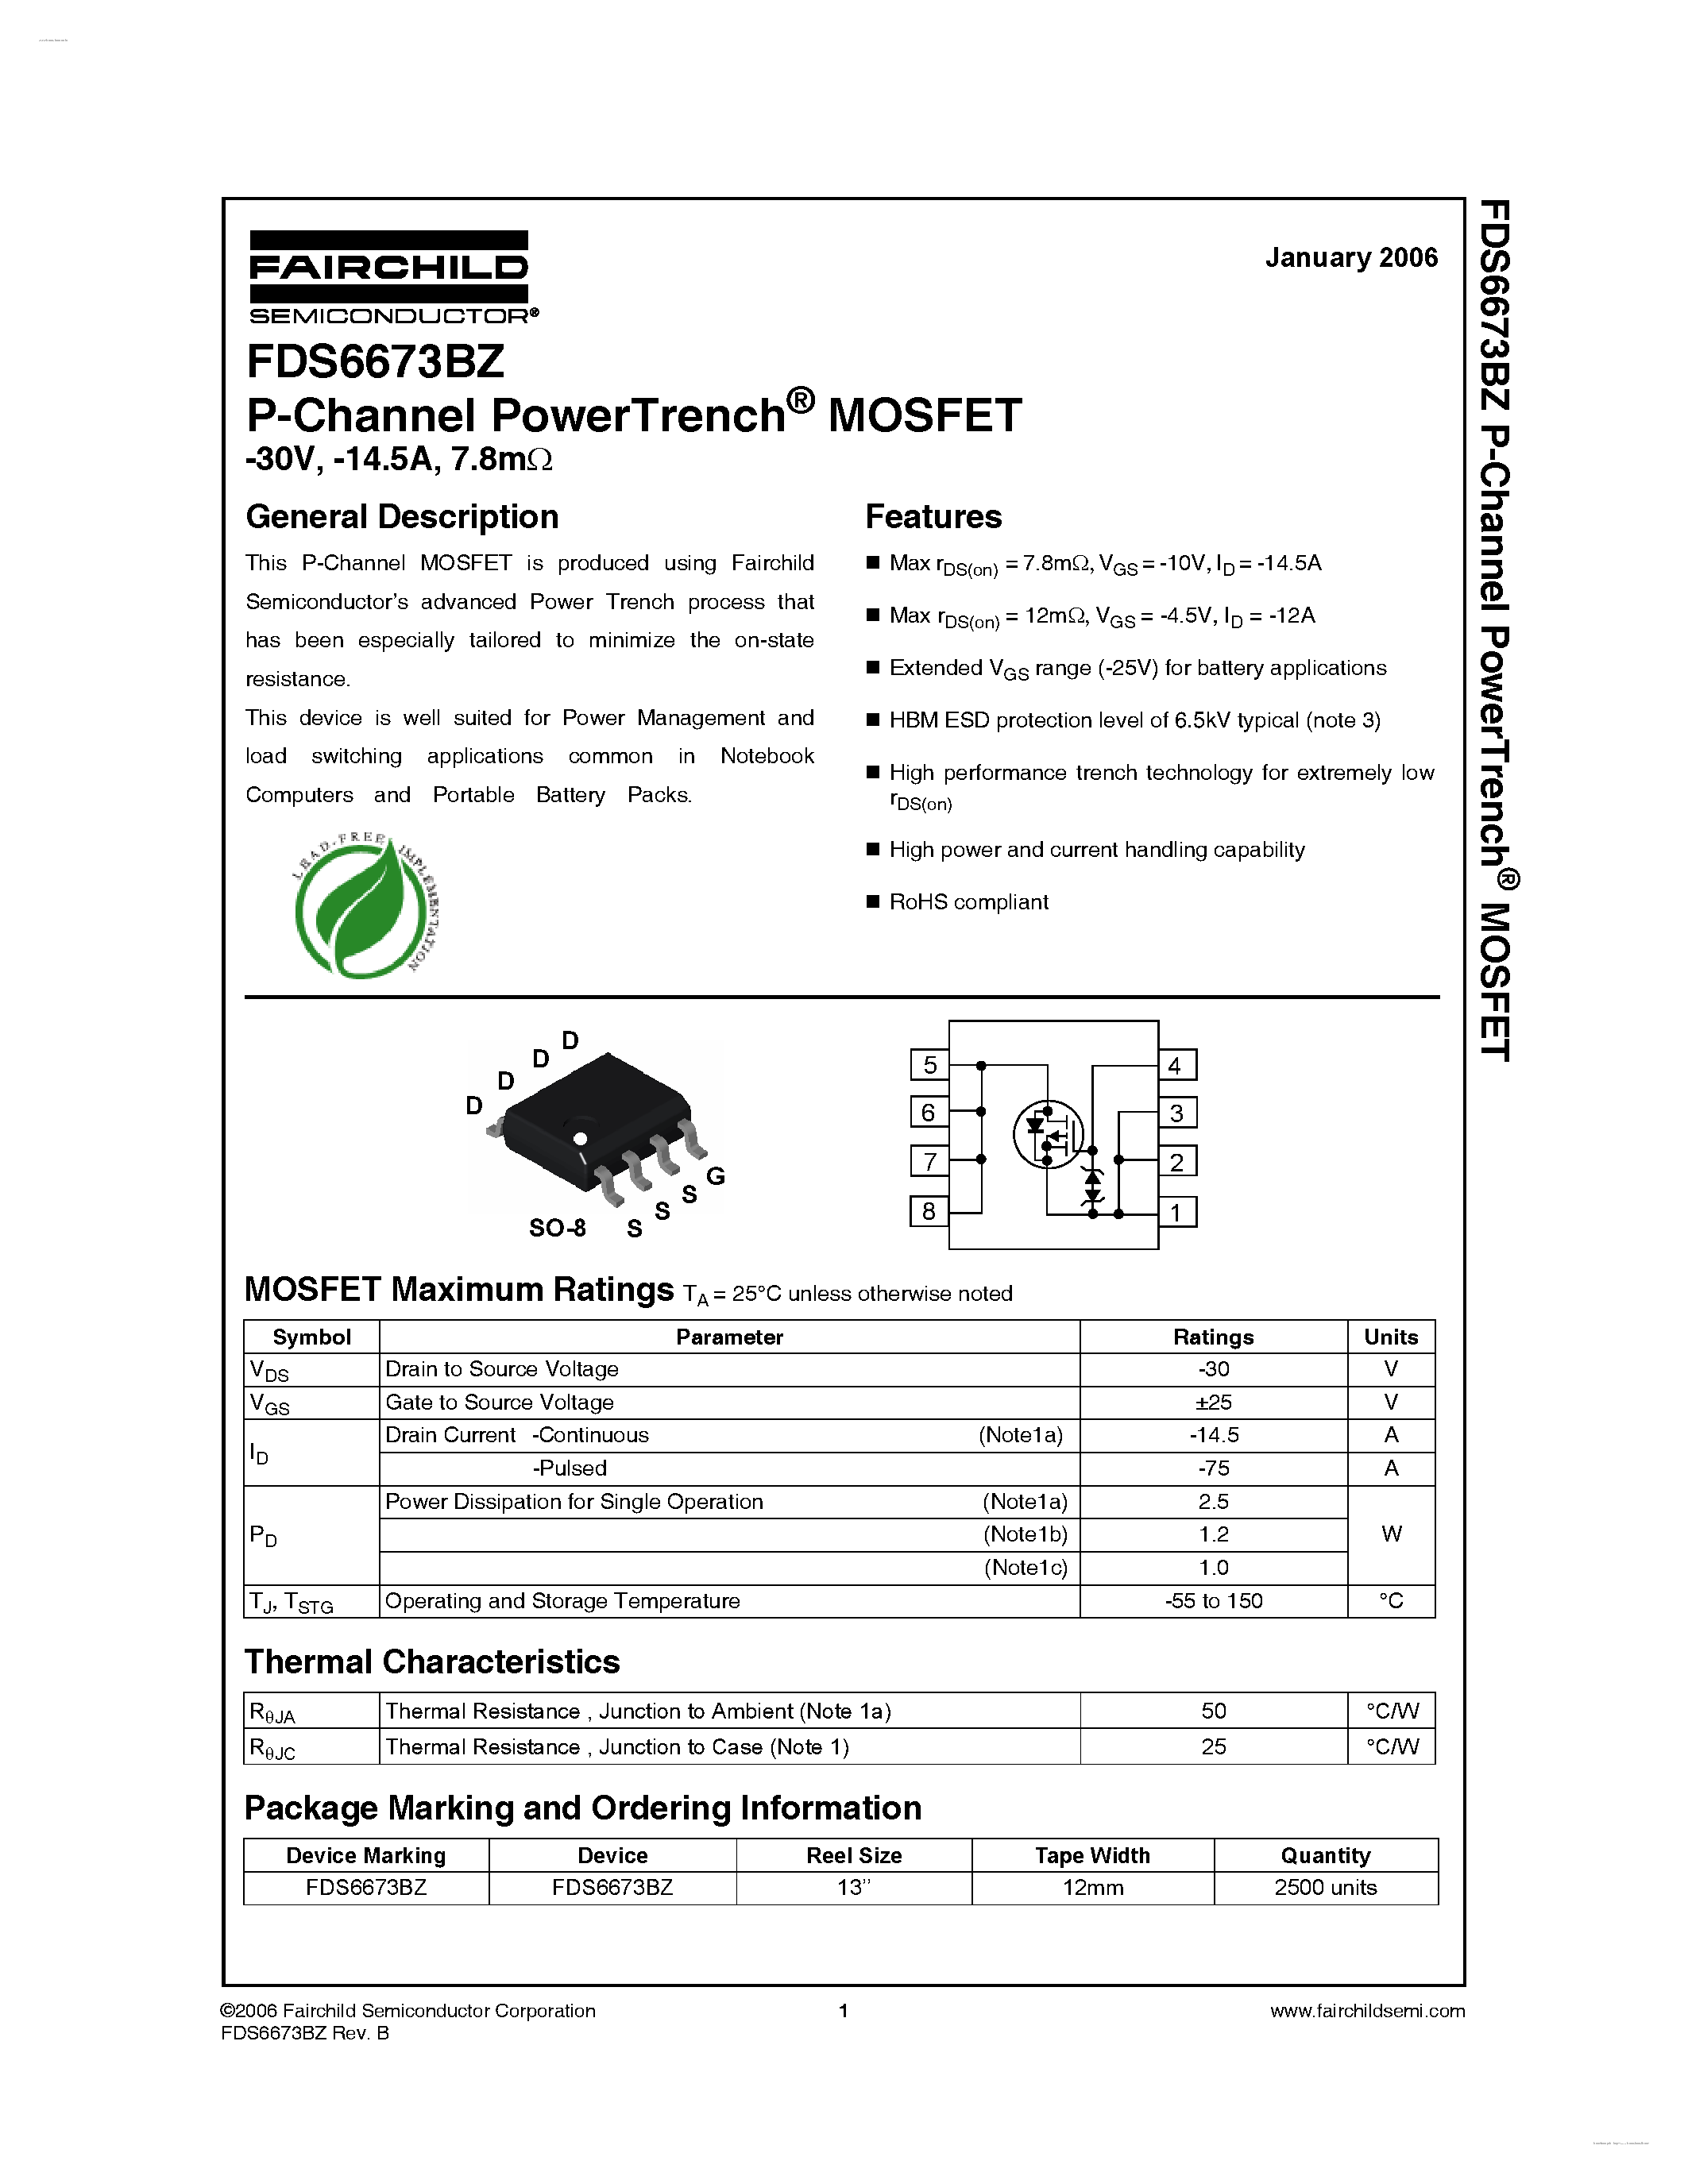 Даташит FDS6673BZ - P-Channel PowerTrench MOSFET страница 1